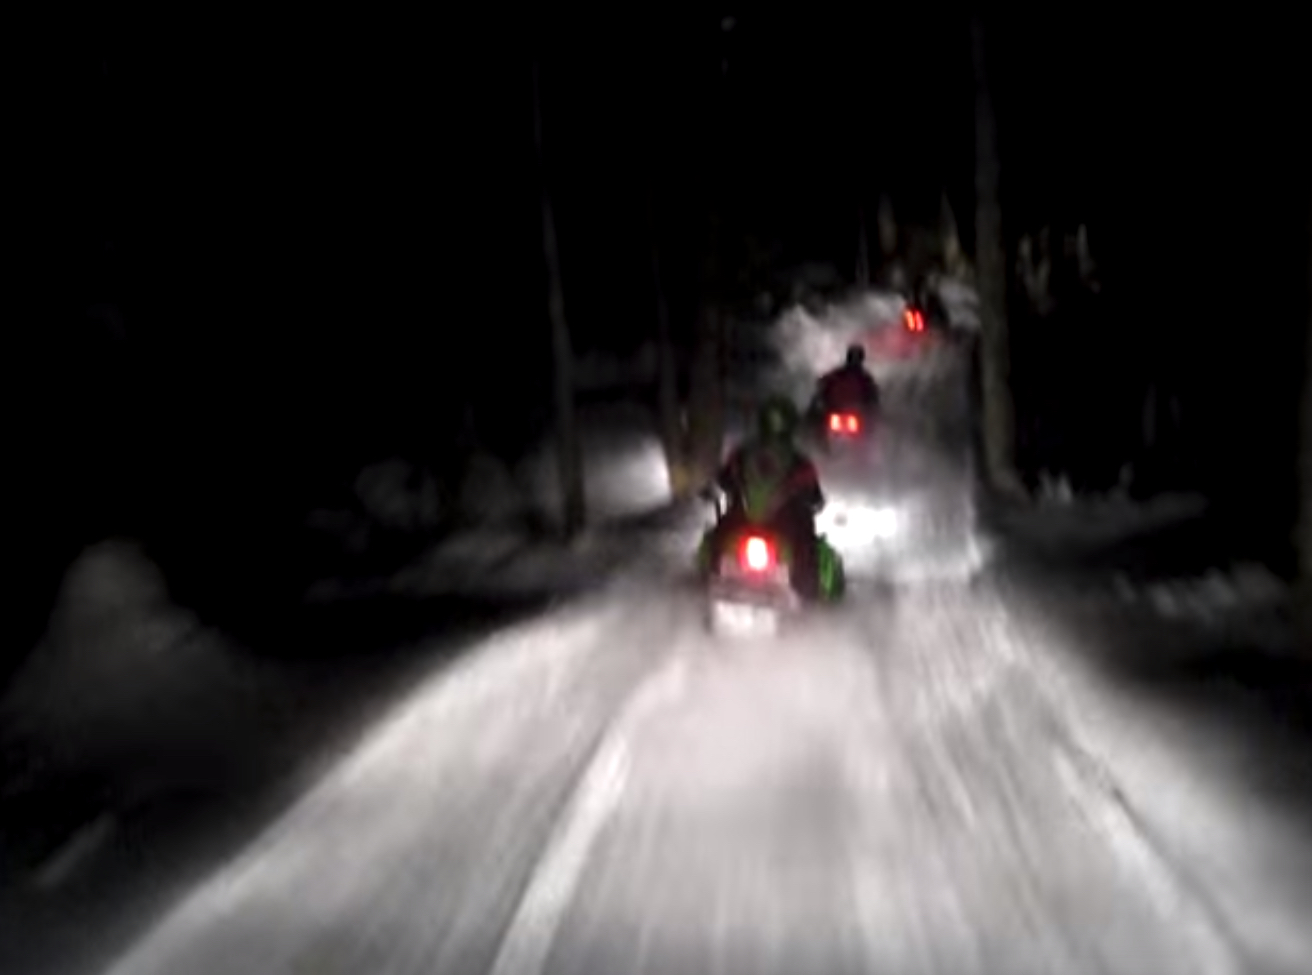 snowmobiles at night, journal of wild culture